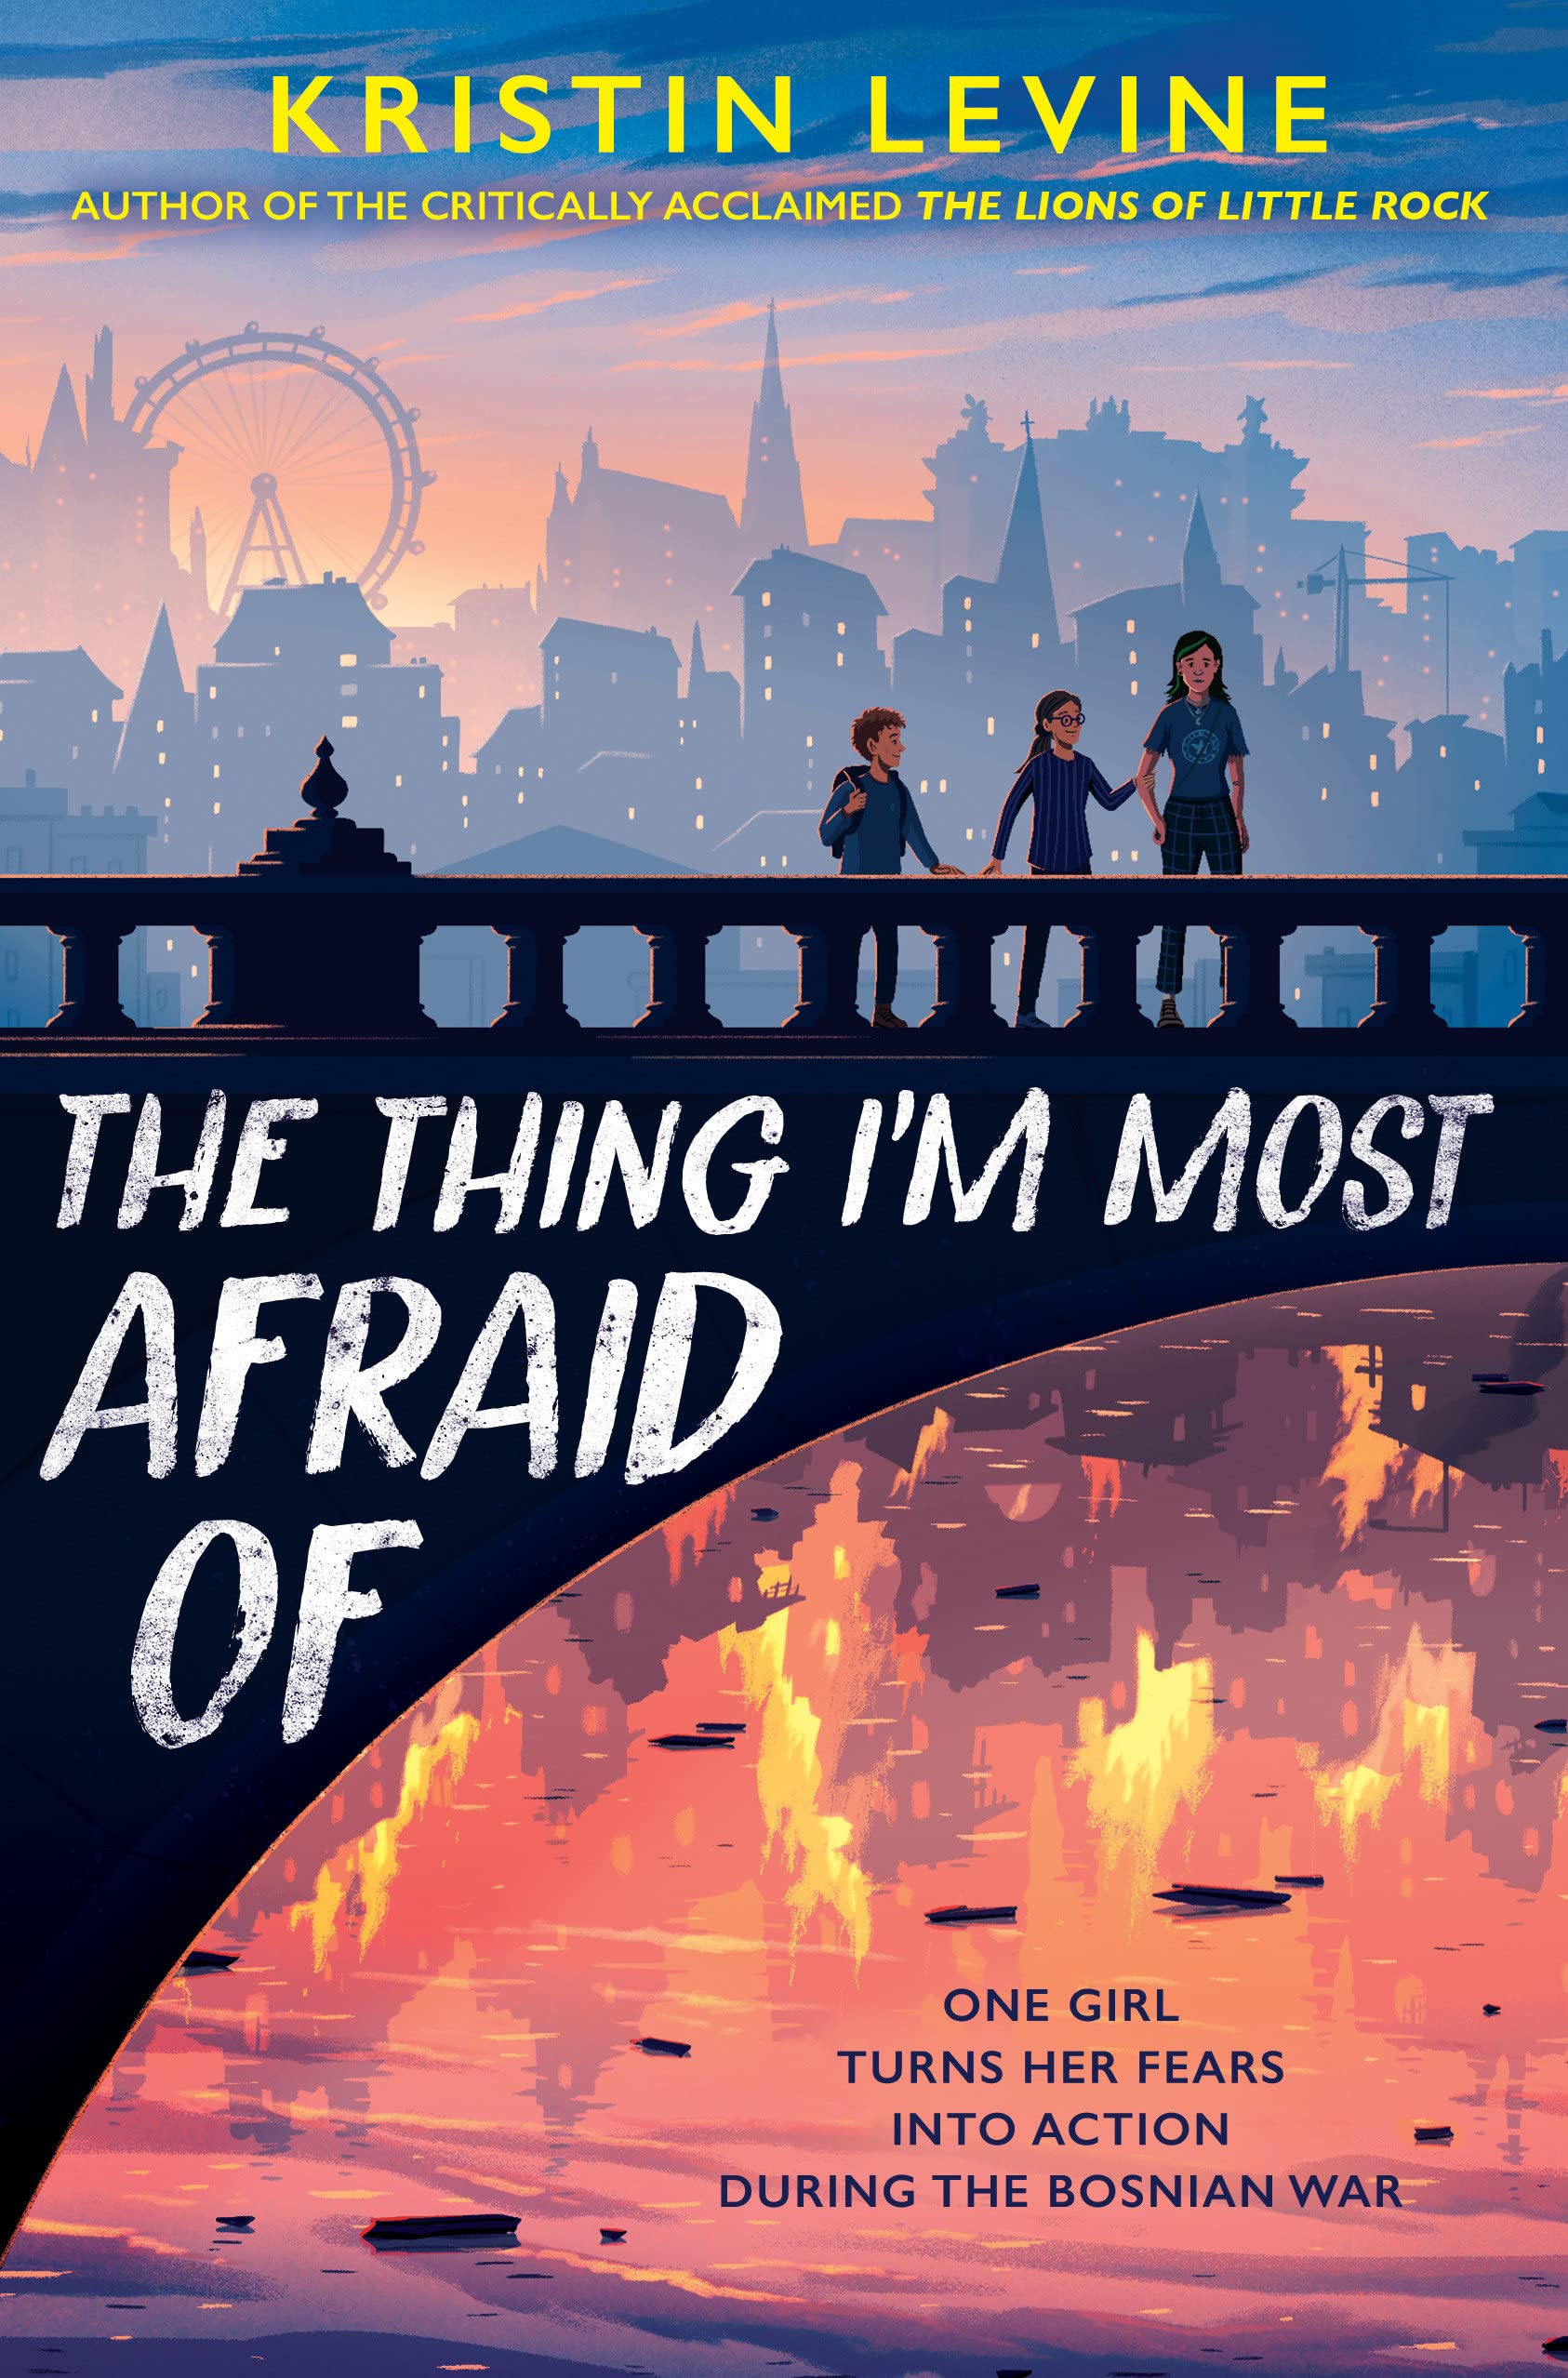 The Thing I’m Most Afraid Of by Kristin Levine